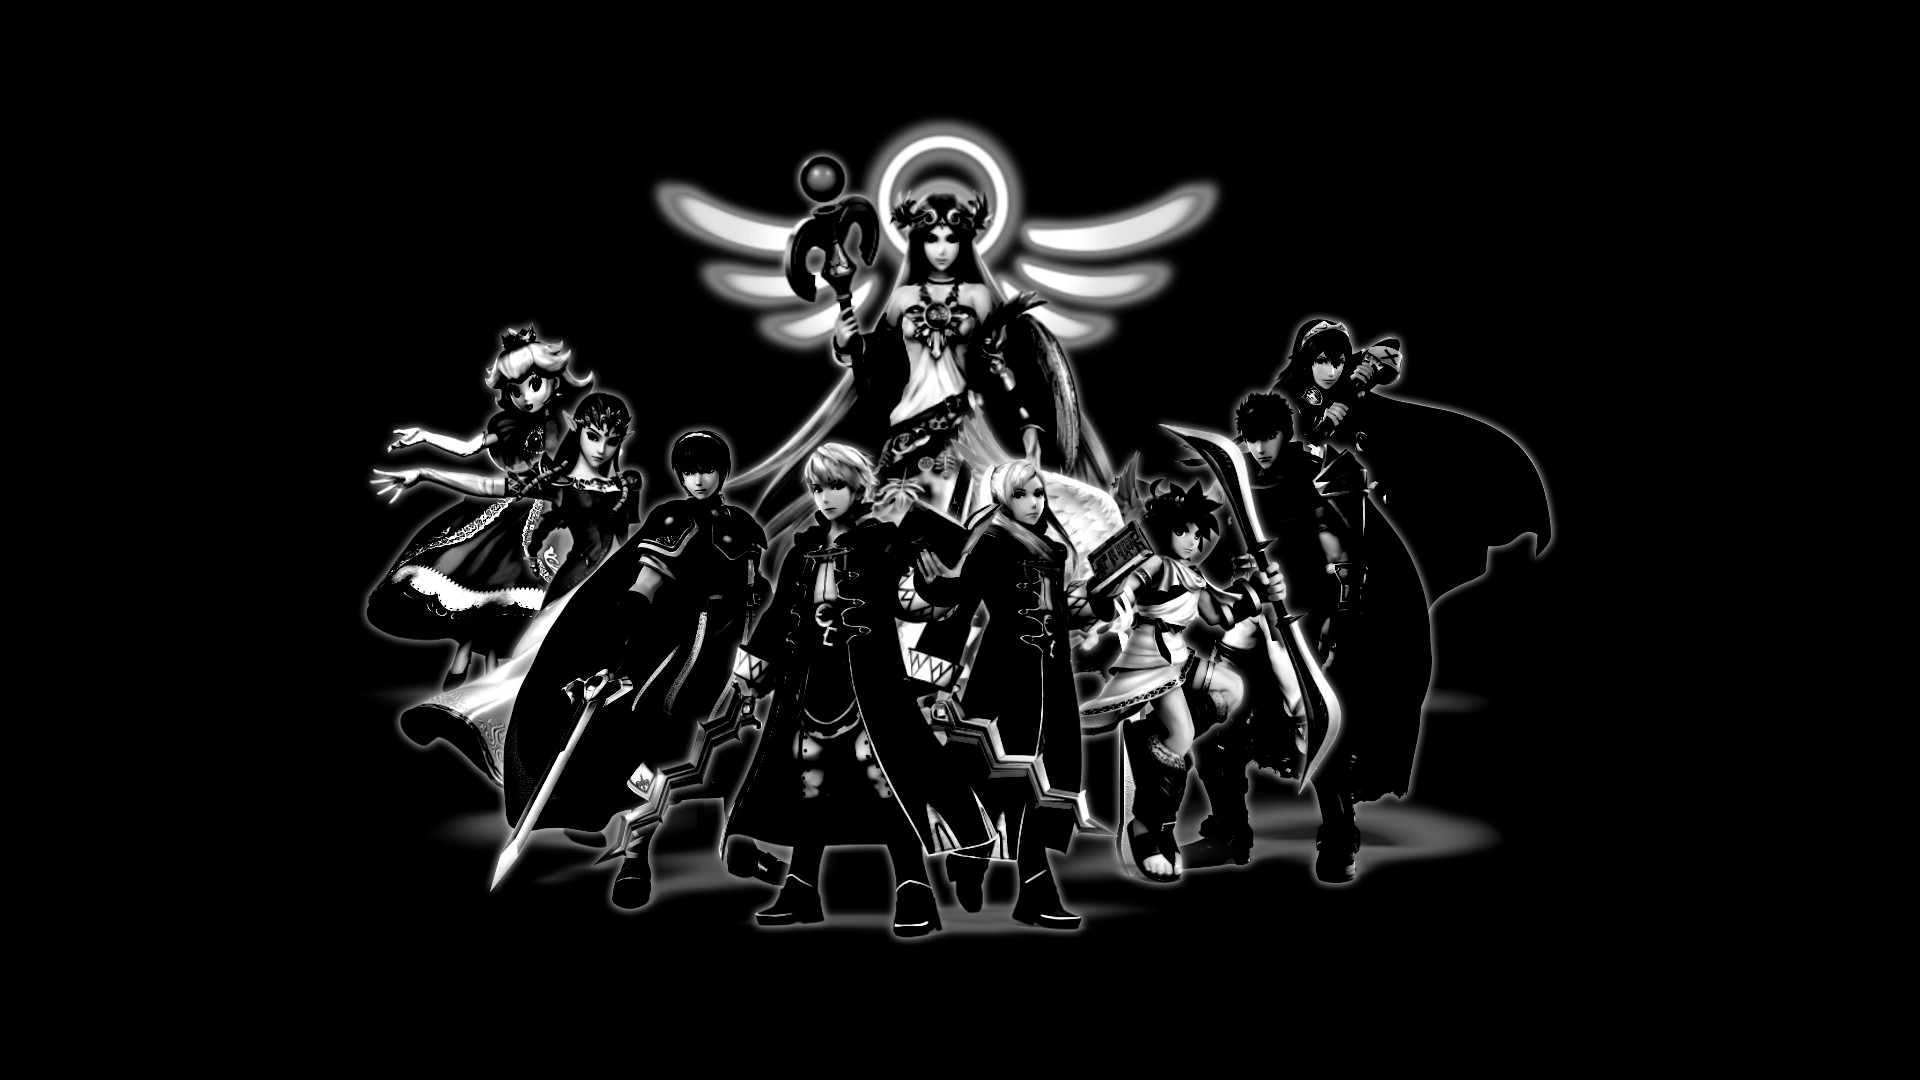 1920x1080 4 Background  BW by CookedEmil Super Smash Bros. 4 Background   BW by CookedEmil